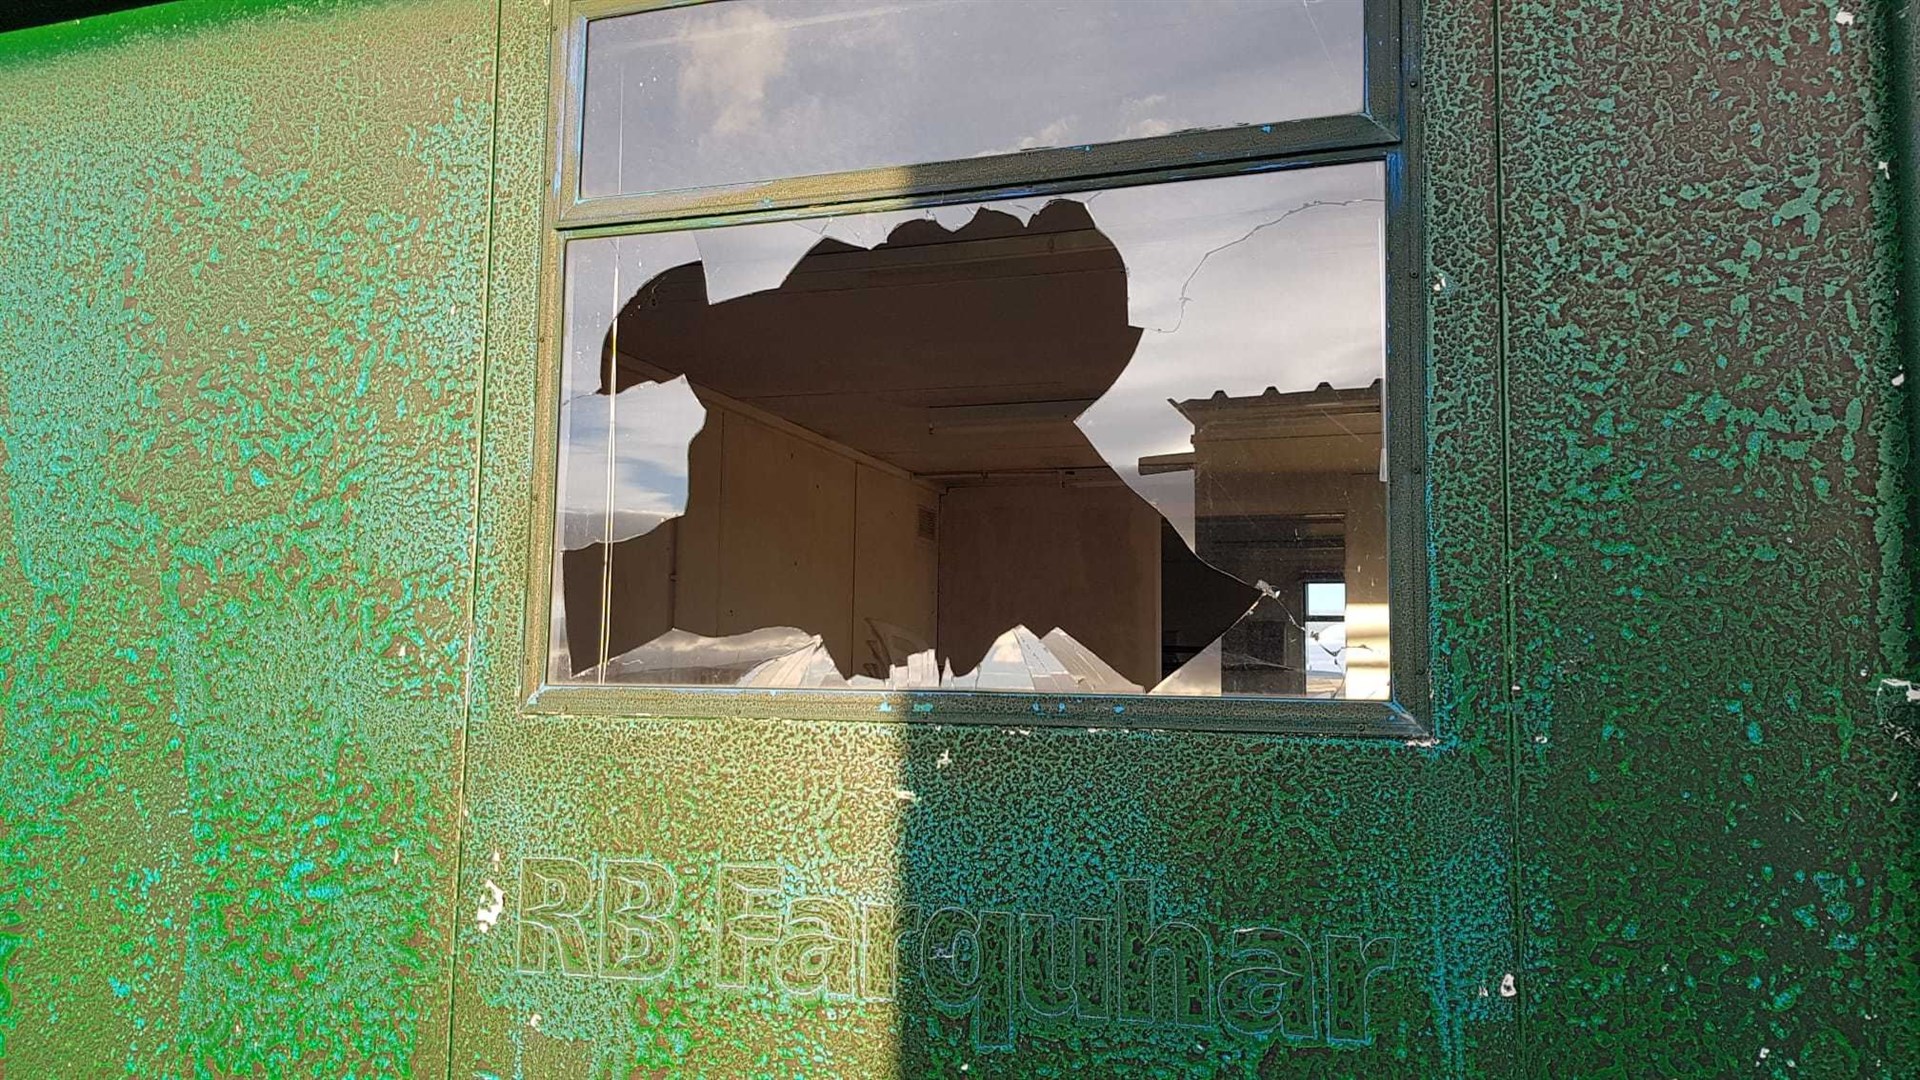 Several cabin windows were smashed during a recent vandalism attack at Keith Show Park.